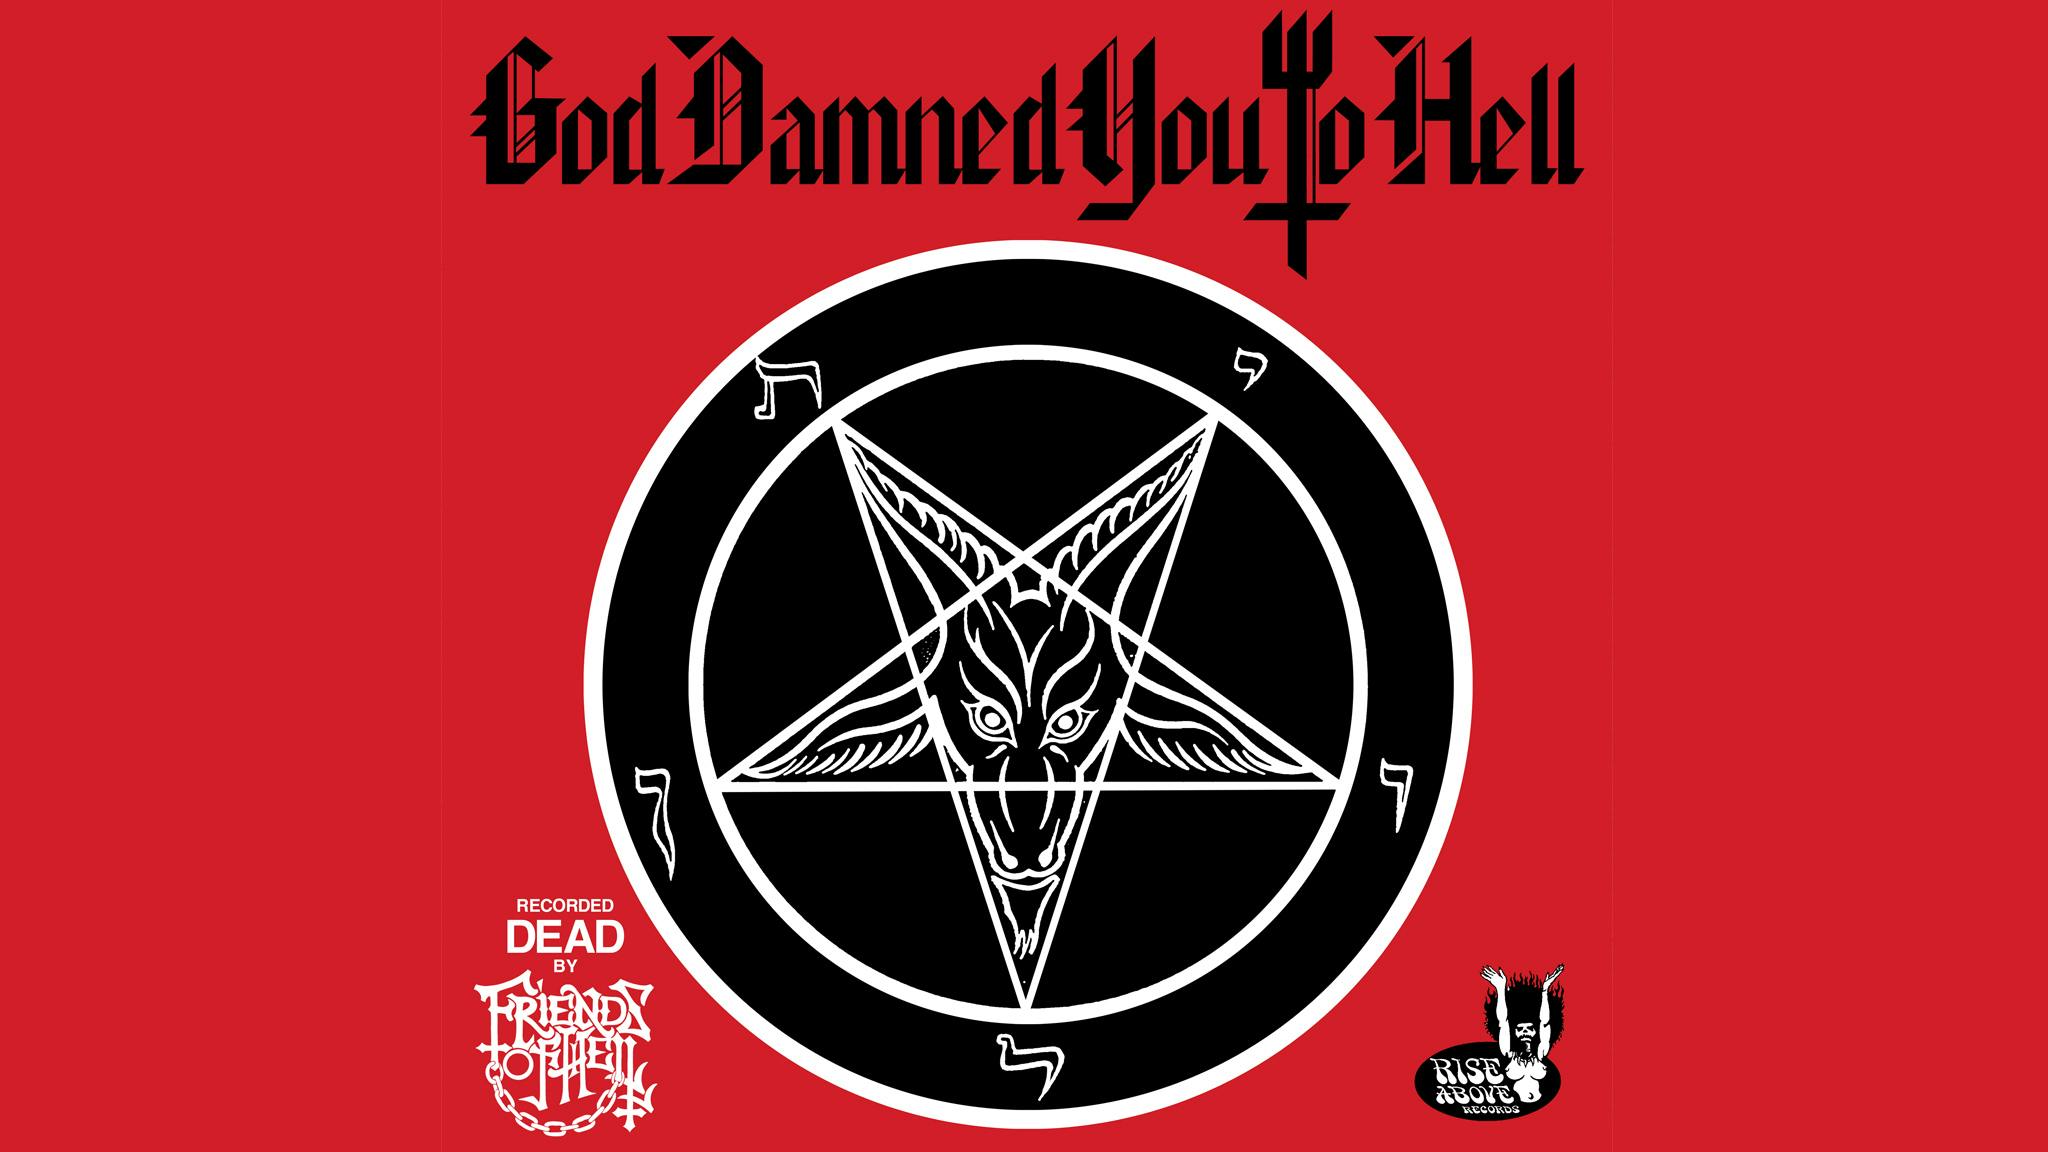 Album review: Friends Of Hell – God Damned You To Hell